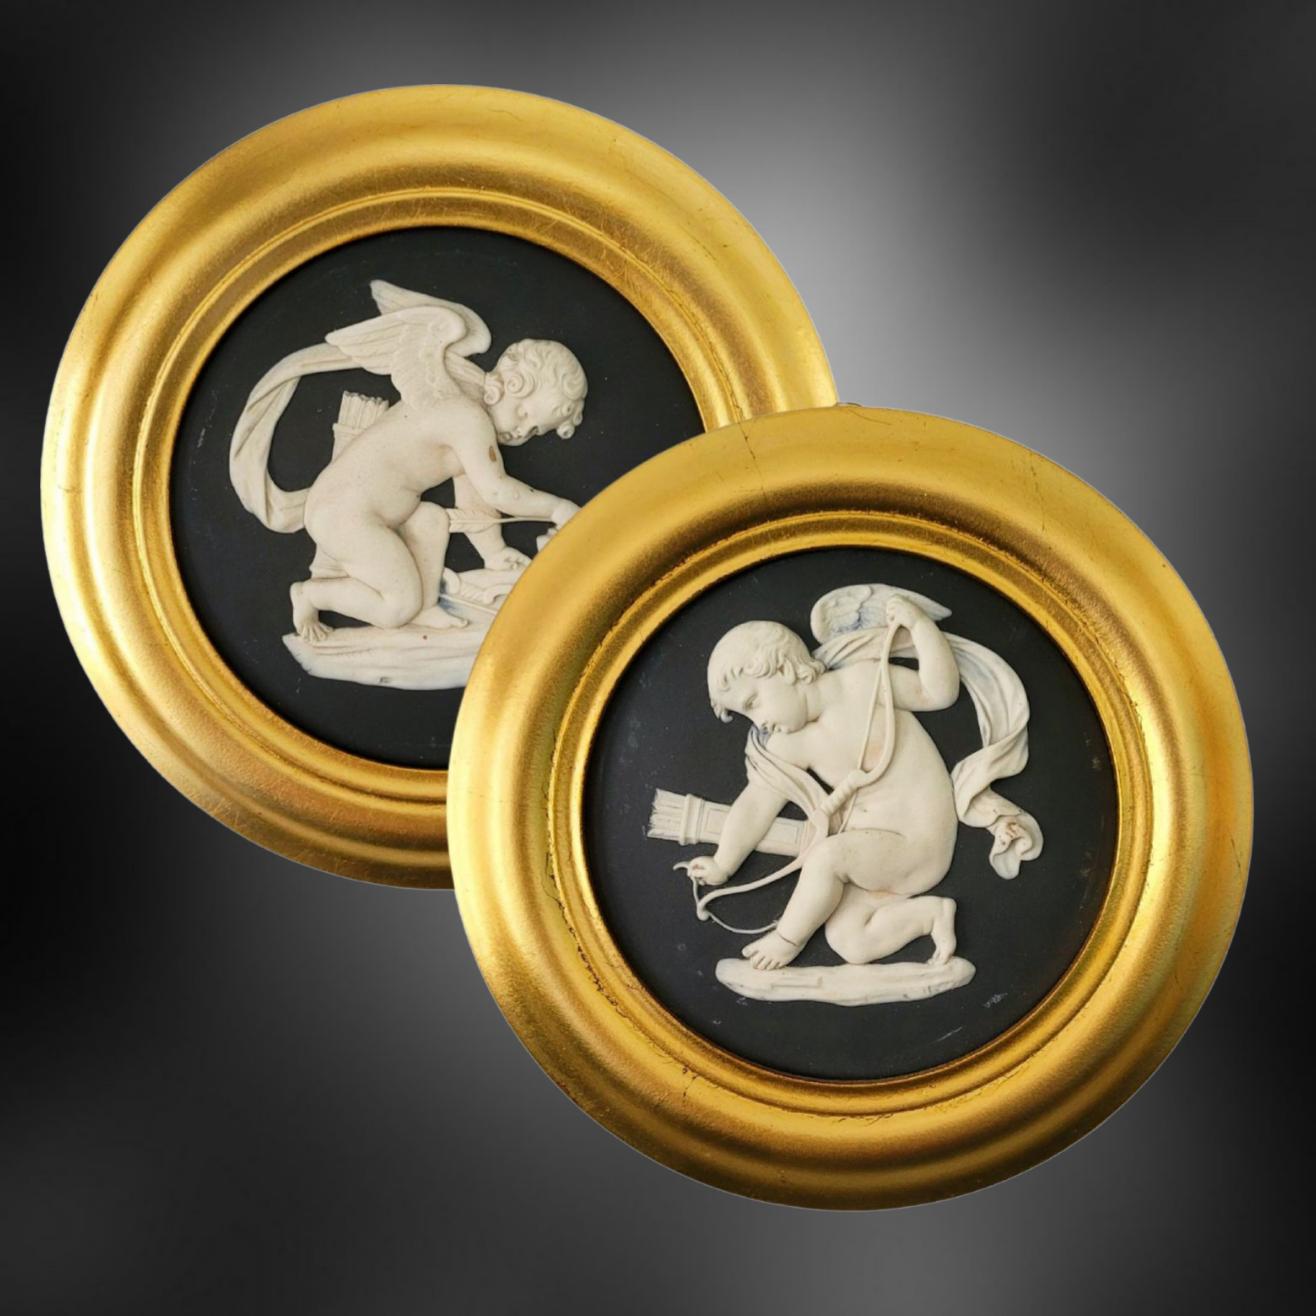 An exceptionally fine pair of roundels in black jasperware, decorated with two images of Cupid: The first sharpening his arrows; the second, of him stringing his bow.

Cupid is a popular figure from ancient Roman mythology who is commonly depicted